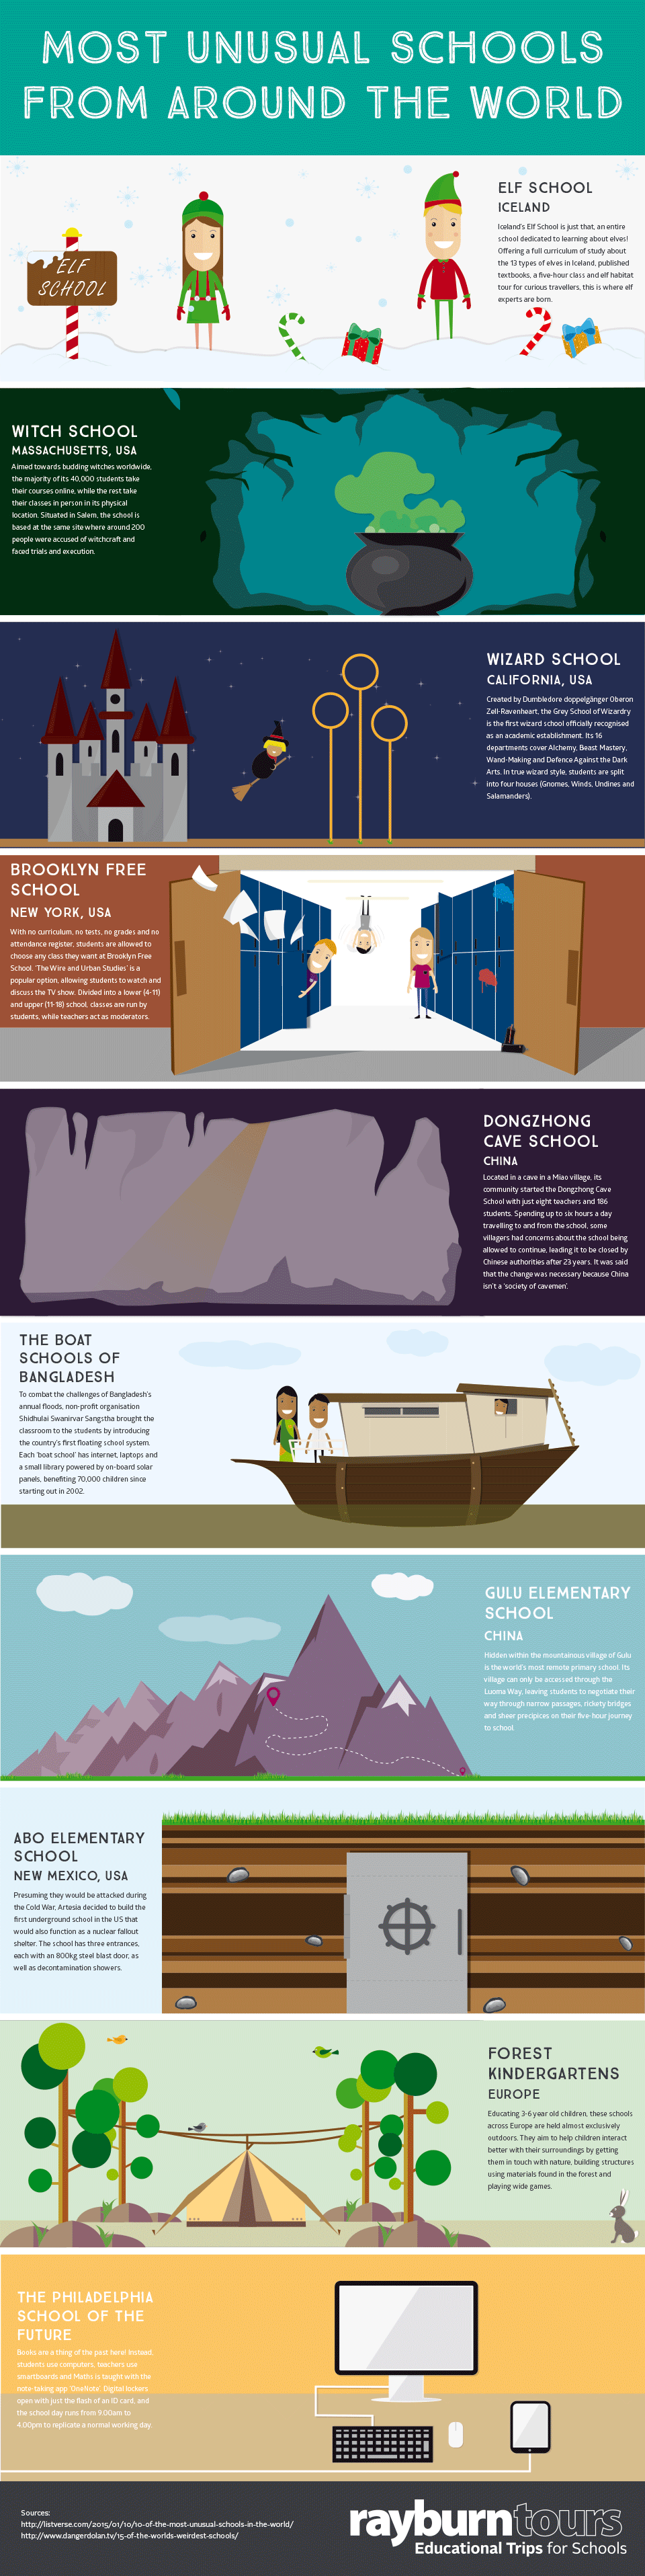 10 Most Unusual Schools from Around the World Infographic